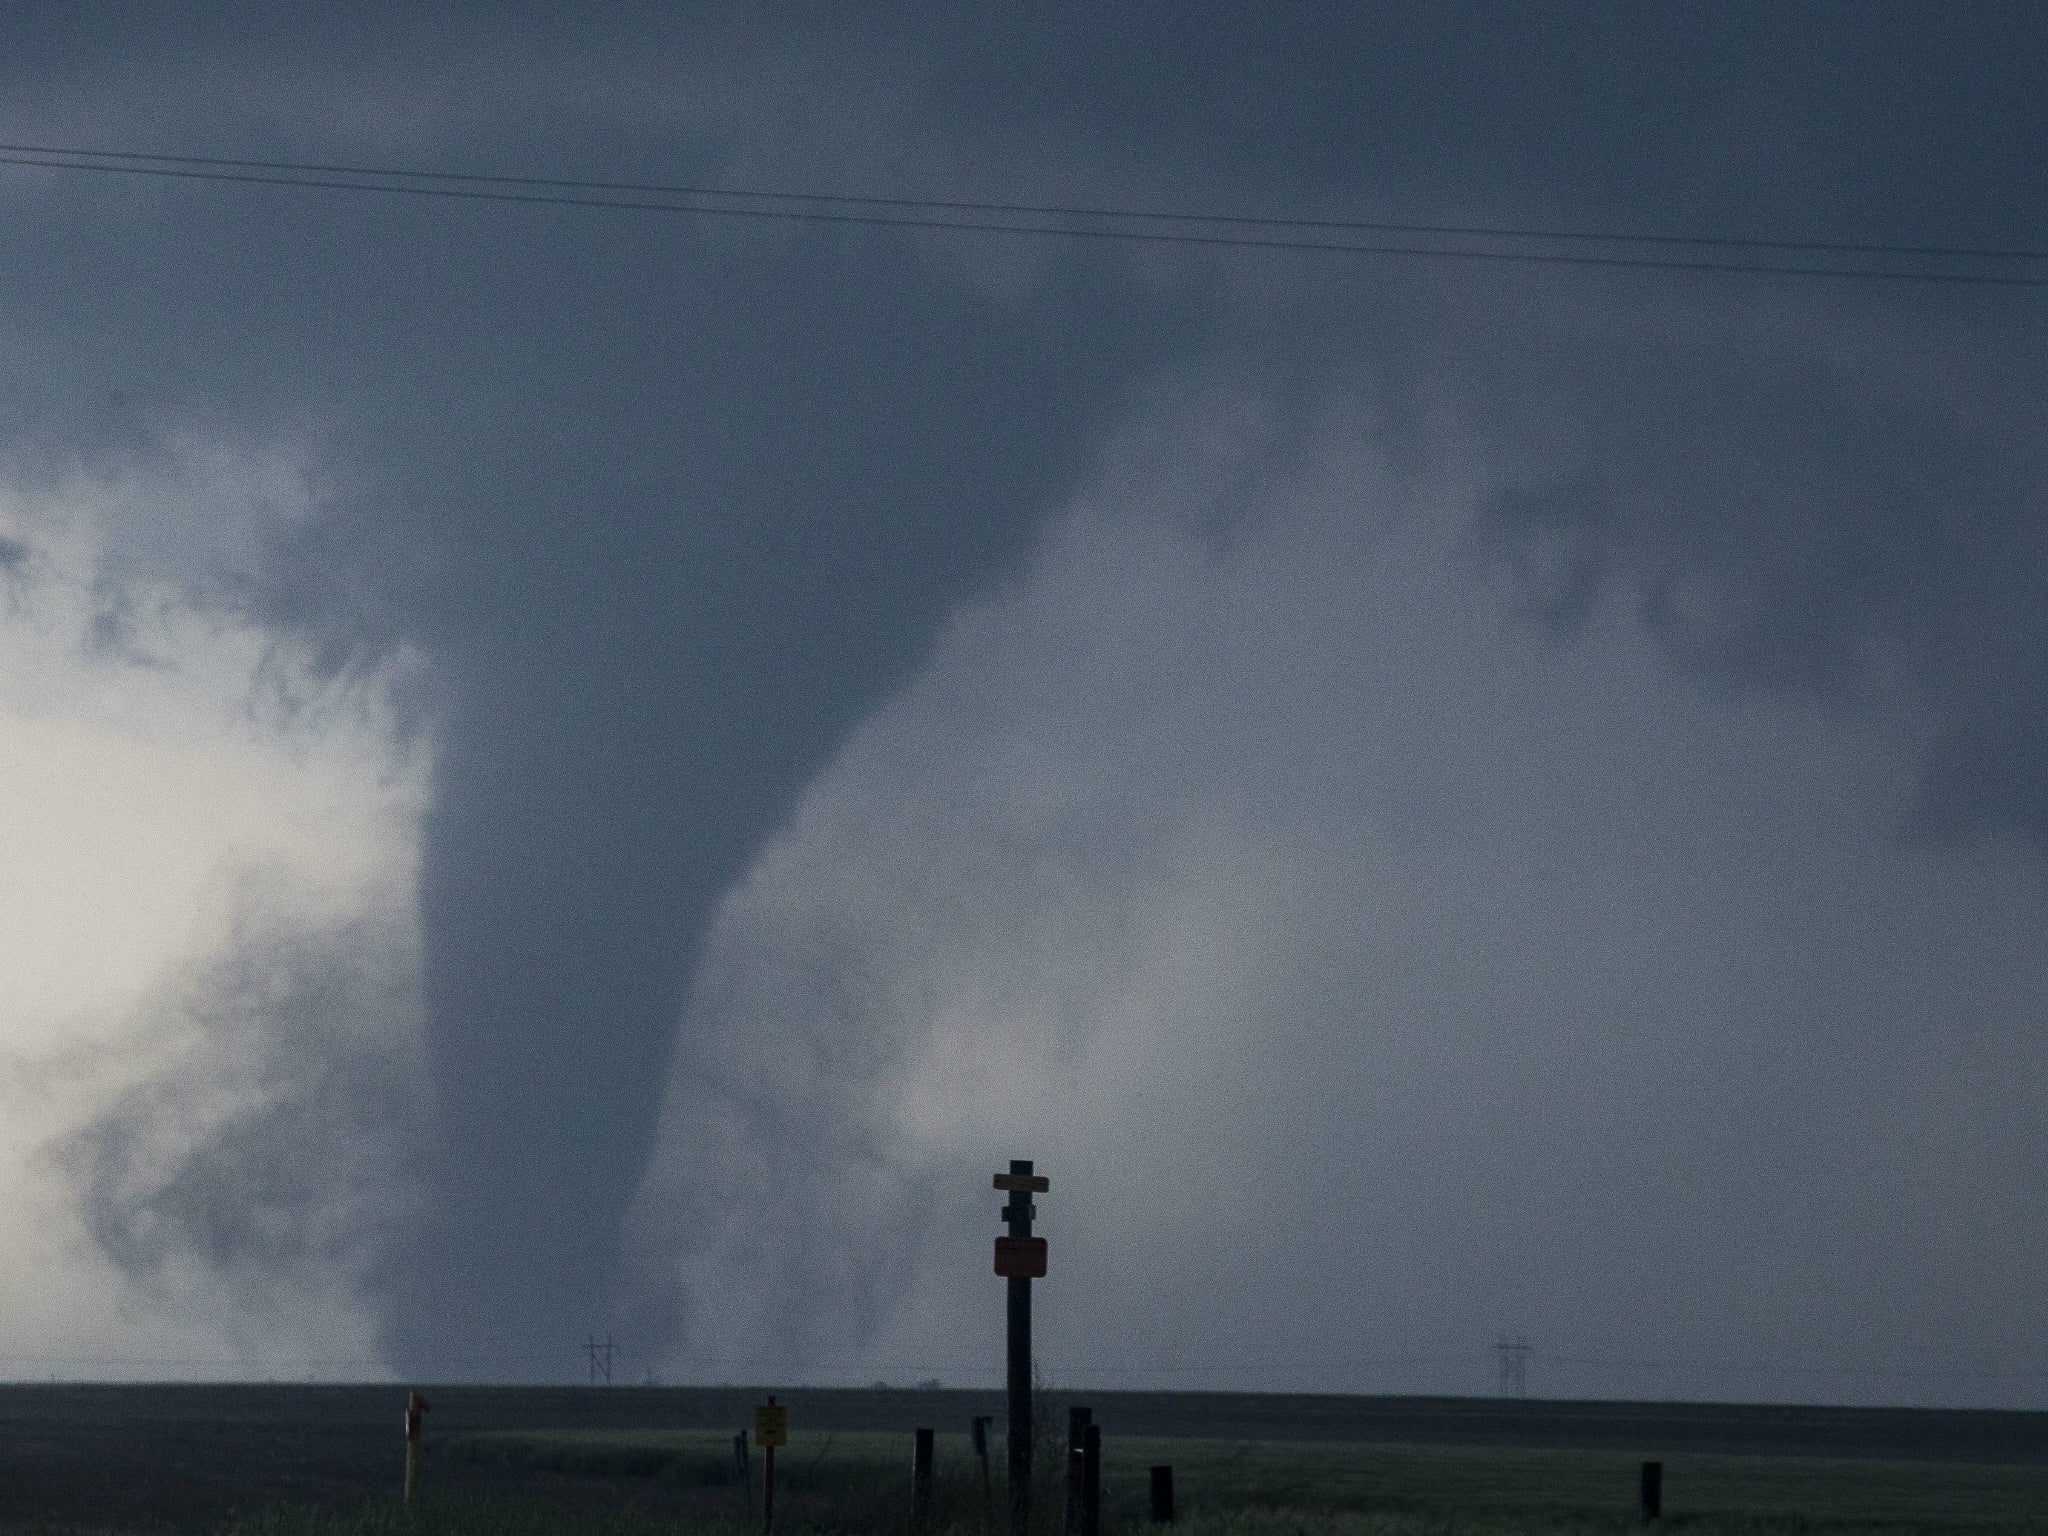 A tornado ripping through Kansas on 24 May 2016. It is hurricane season in the US midwest region.